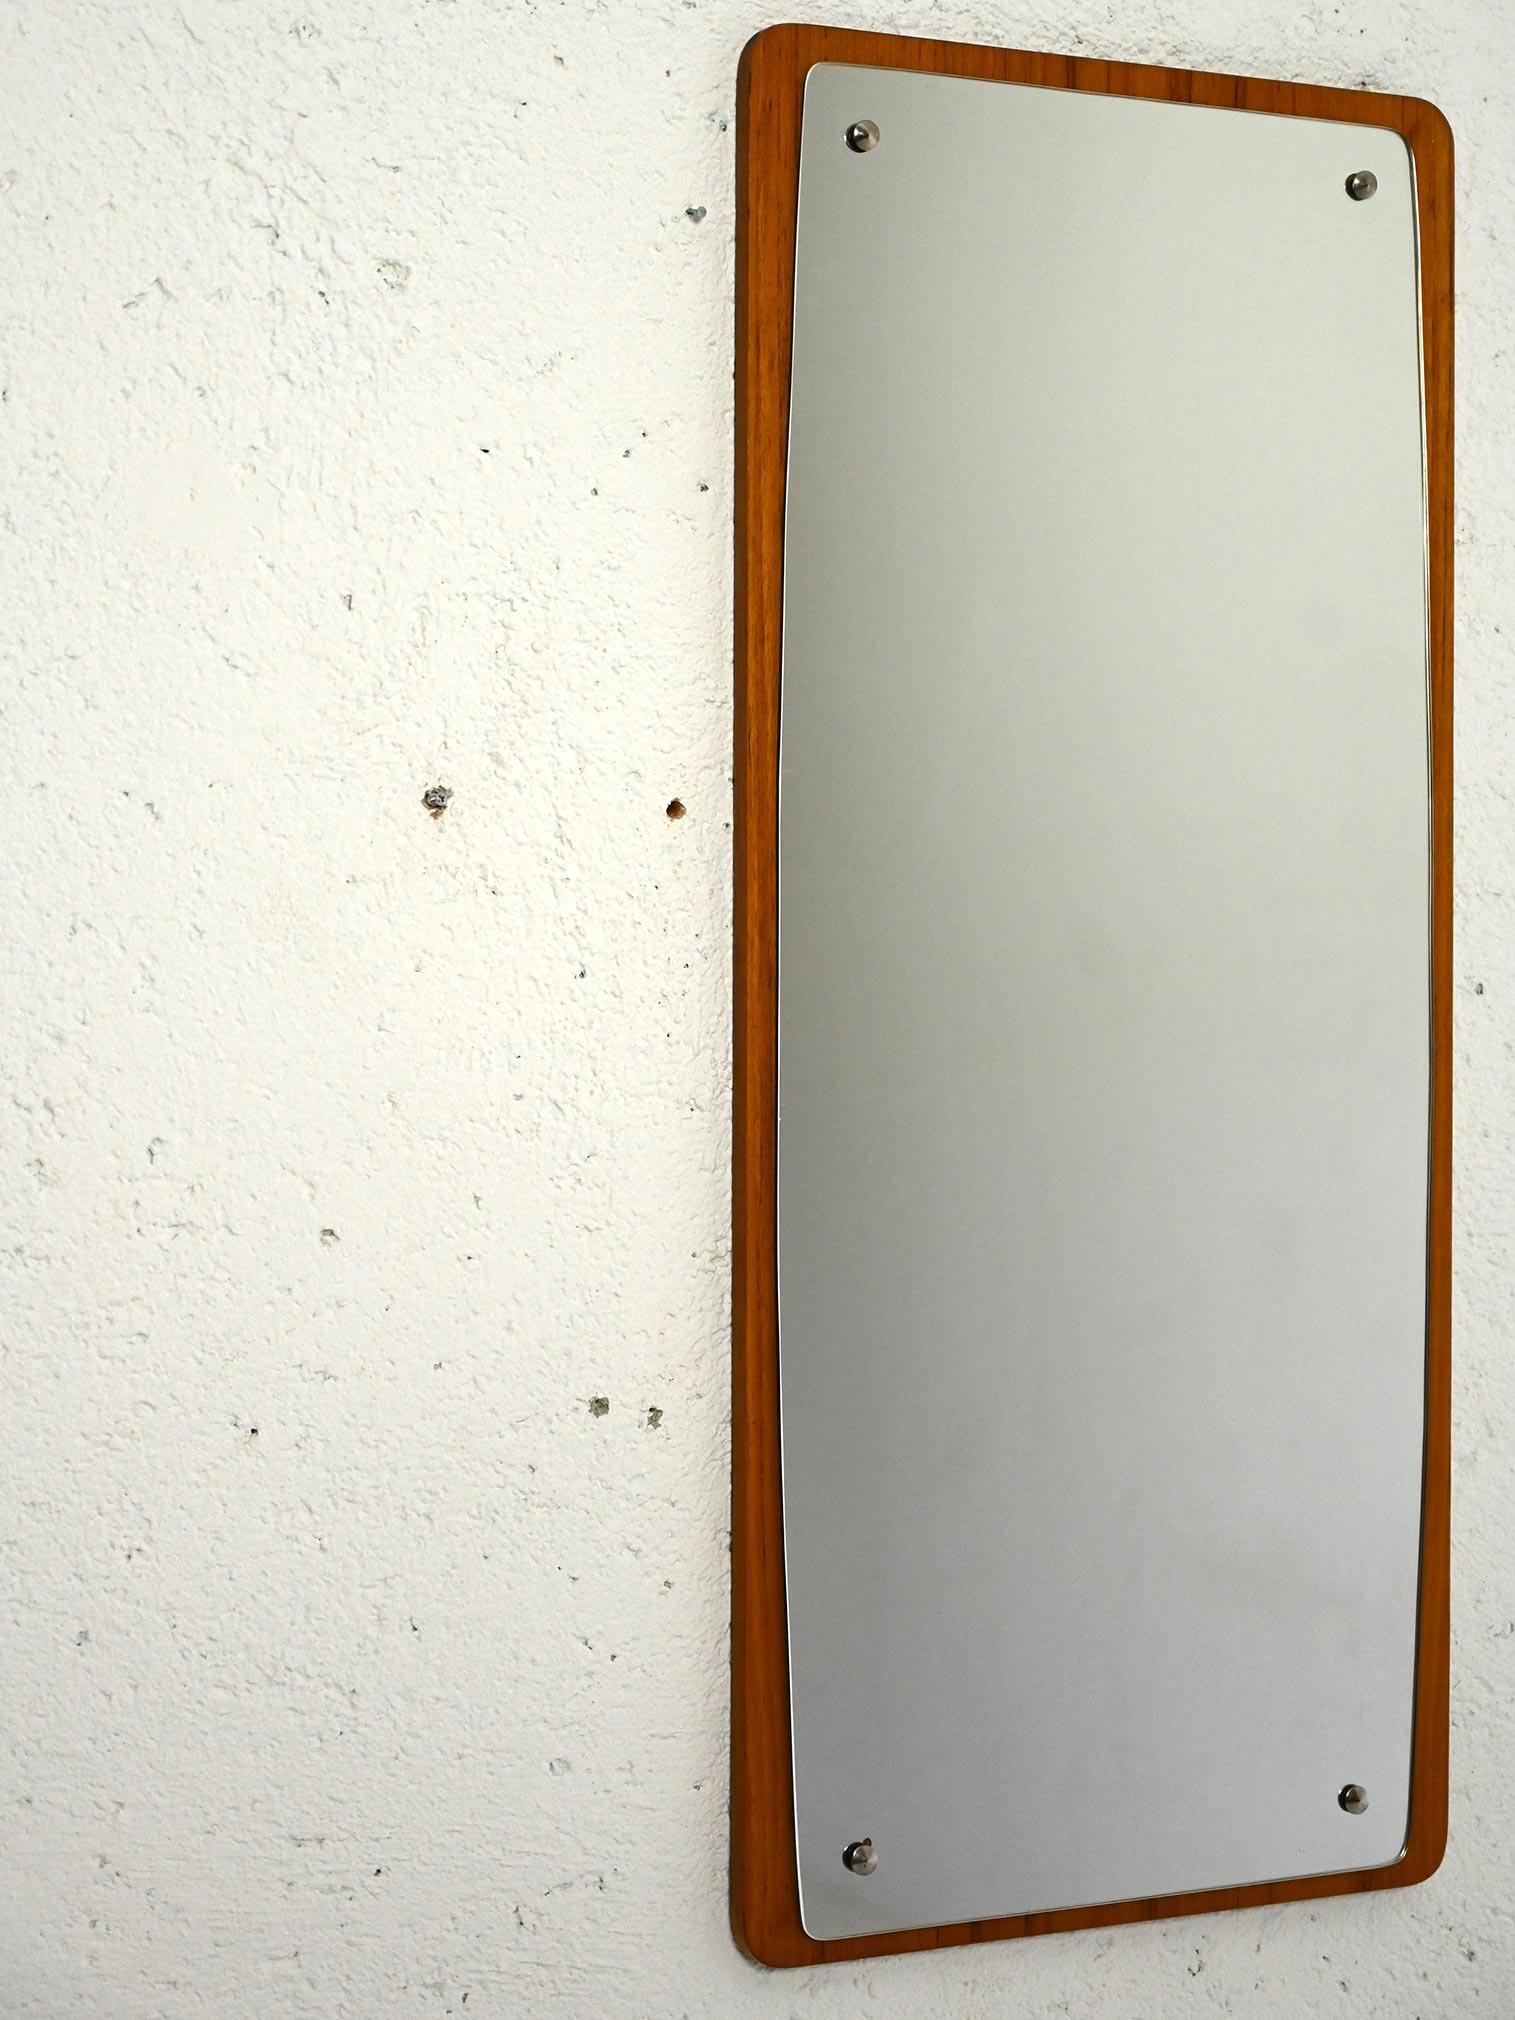 Scandinavian 1960s mirror.

A mirror with small dimensions, characterized by a slight curvature at the sides that gives it a unique and elegant touch. The frame is made of teak wood, following the typical style of the 1960s, it presents a linear and